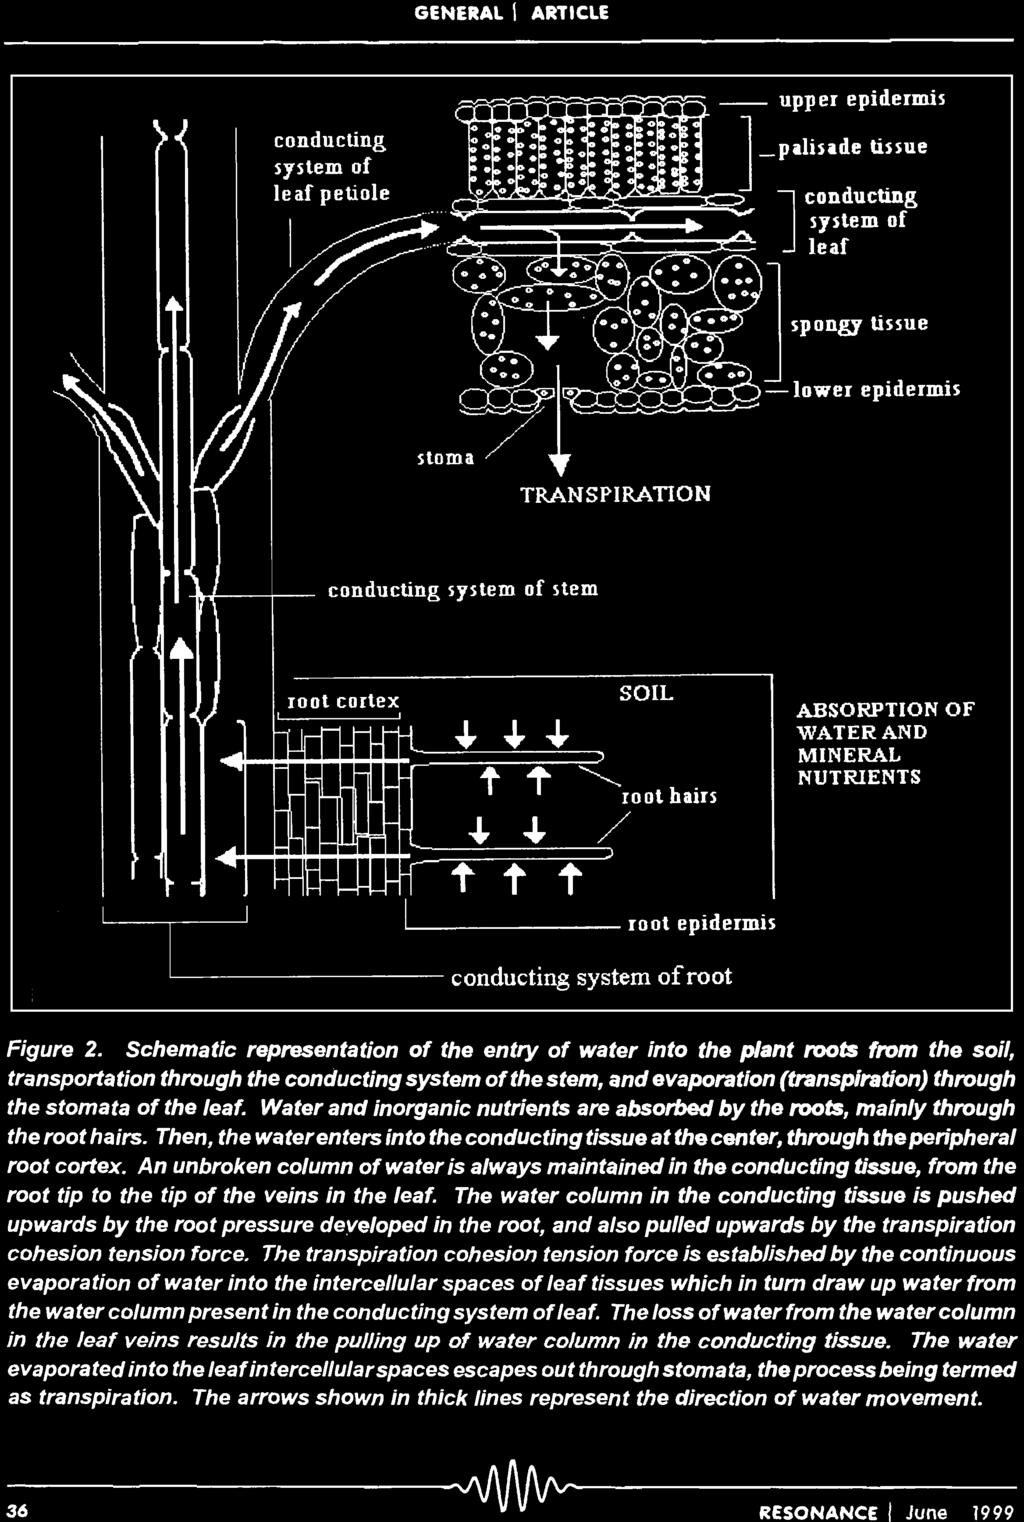 Schematic representation of the entry of water into the plant roots from the soil, transportation through the conducting system of the stem, and evaporation (transpiration) through the stomata of the